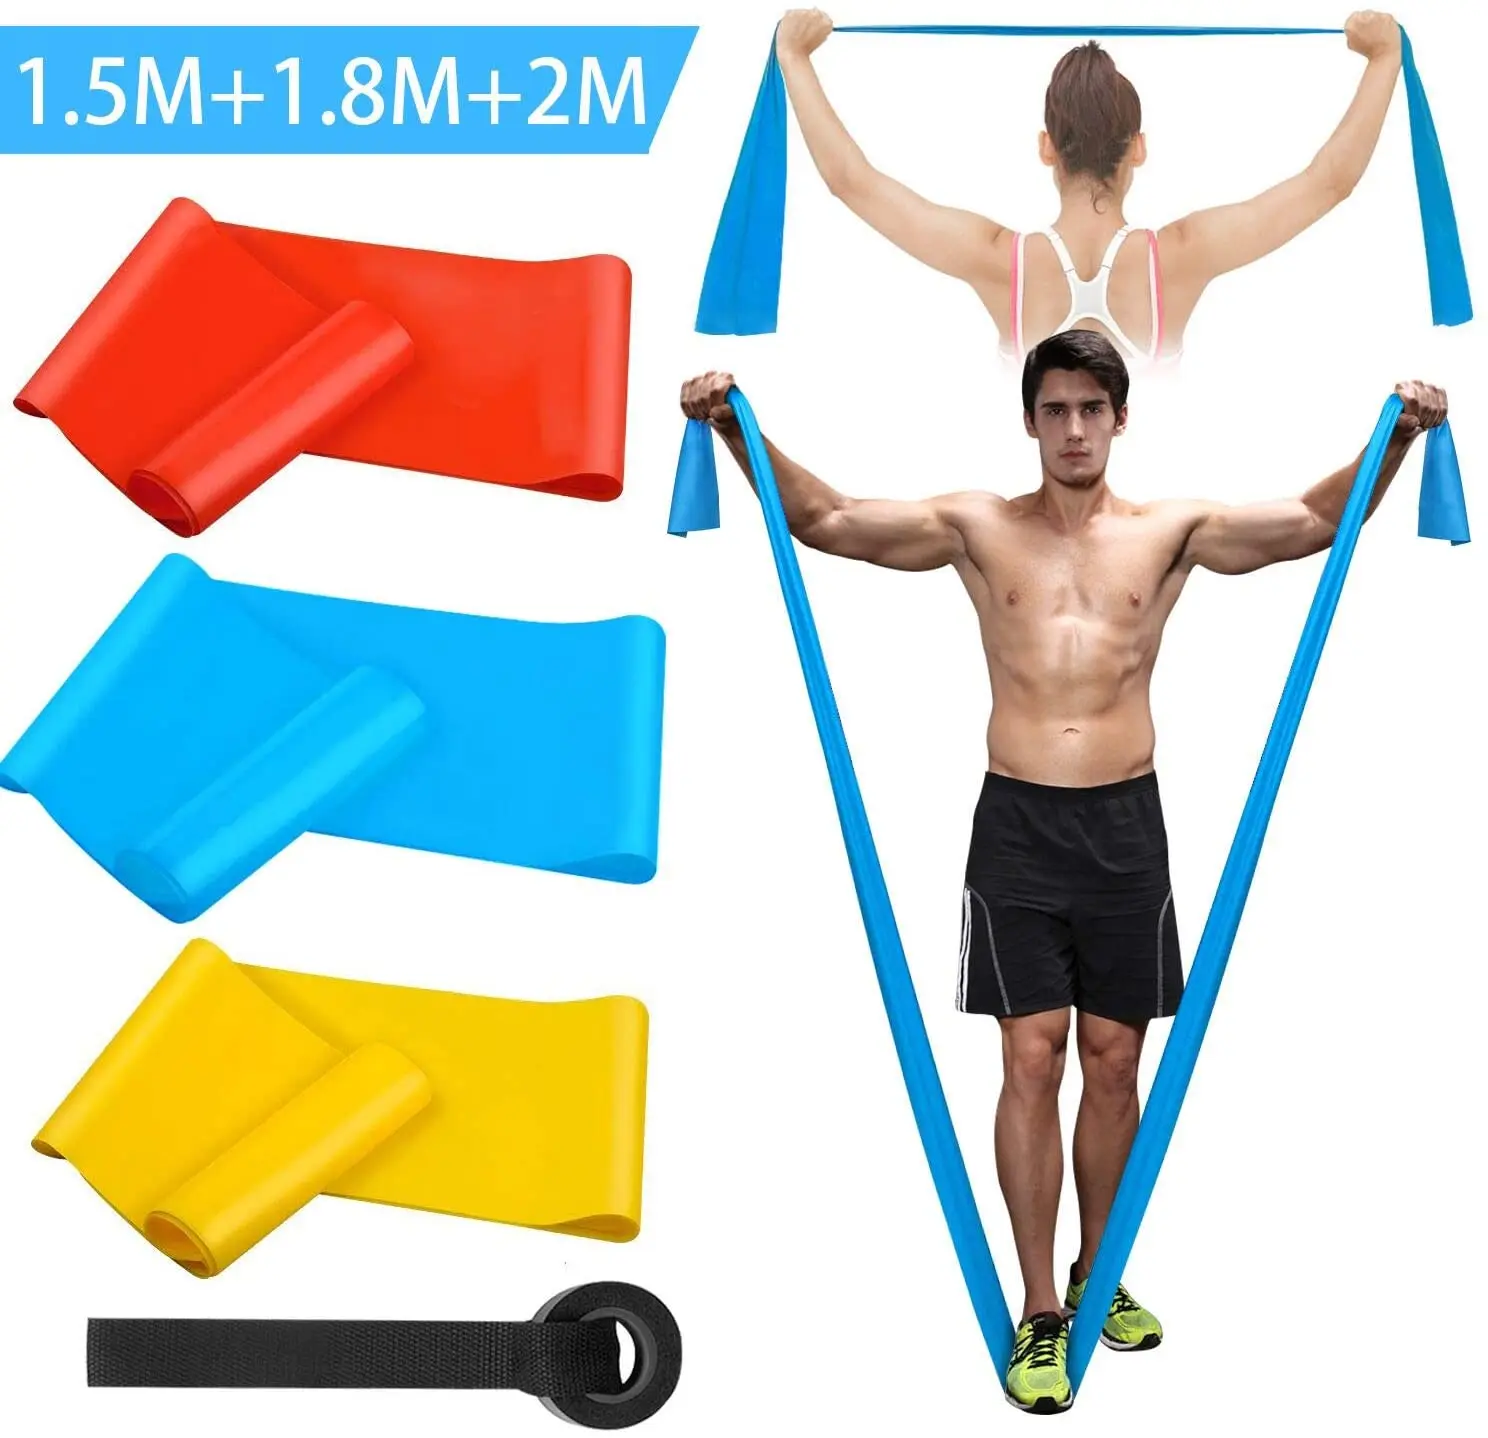 Elastic Fitness Bands 3Pcs Resistance Bands Elastic Fitness Tapes Yoga Pilates Crossfit Stretching Muscular Work Out Equipment